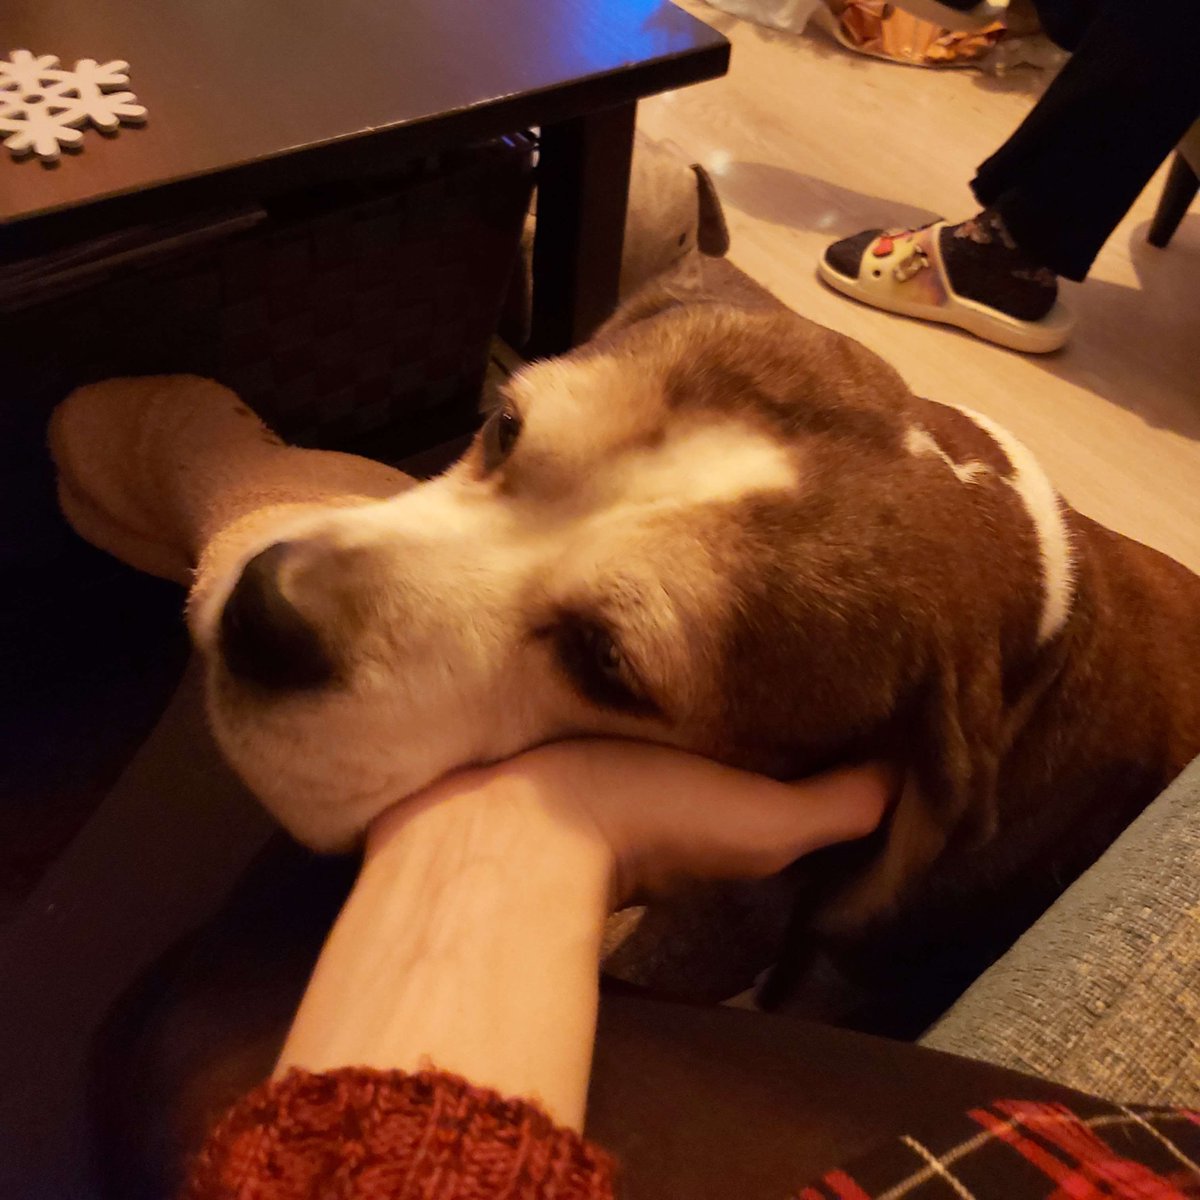 My dog Django is getting put to sleep on Friday, so i'll be taking my time to grieve. He made it past 13, and has been such a good boy, love you buddy